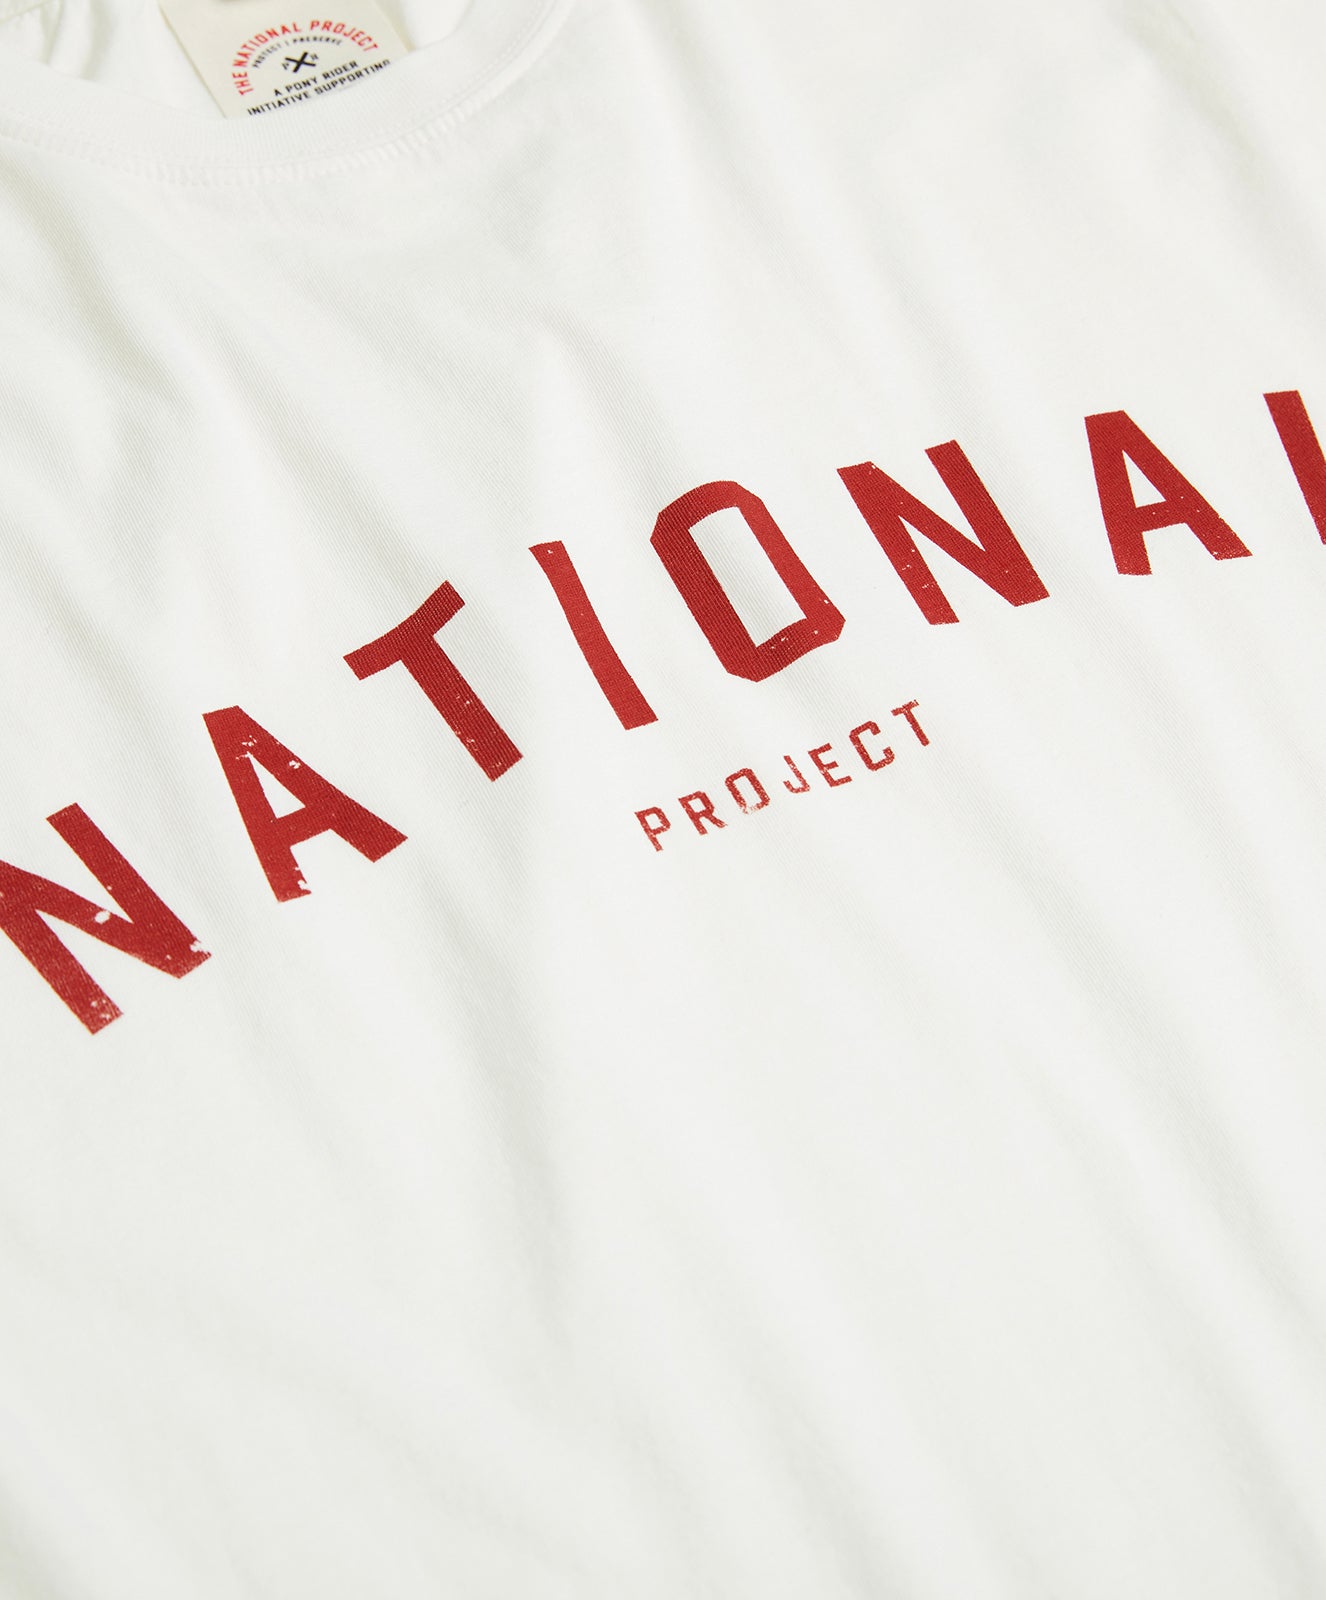 National Project Tee | Vintage White